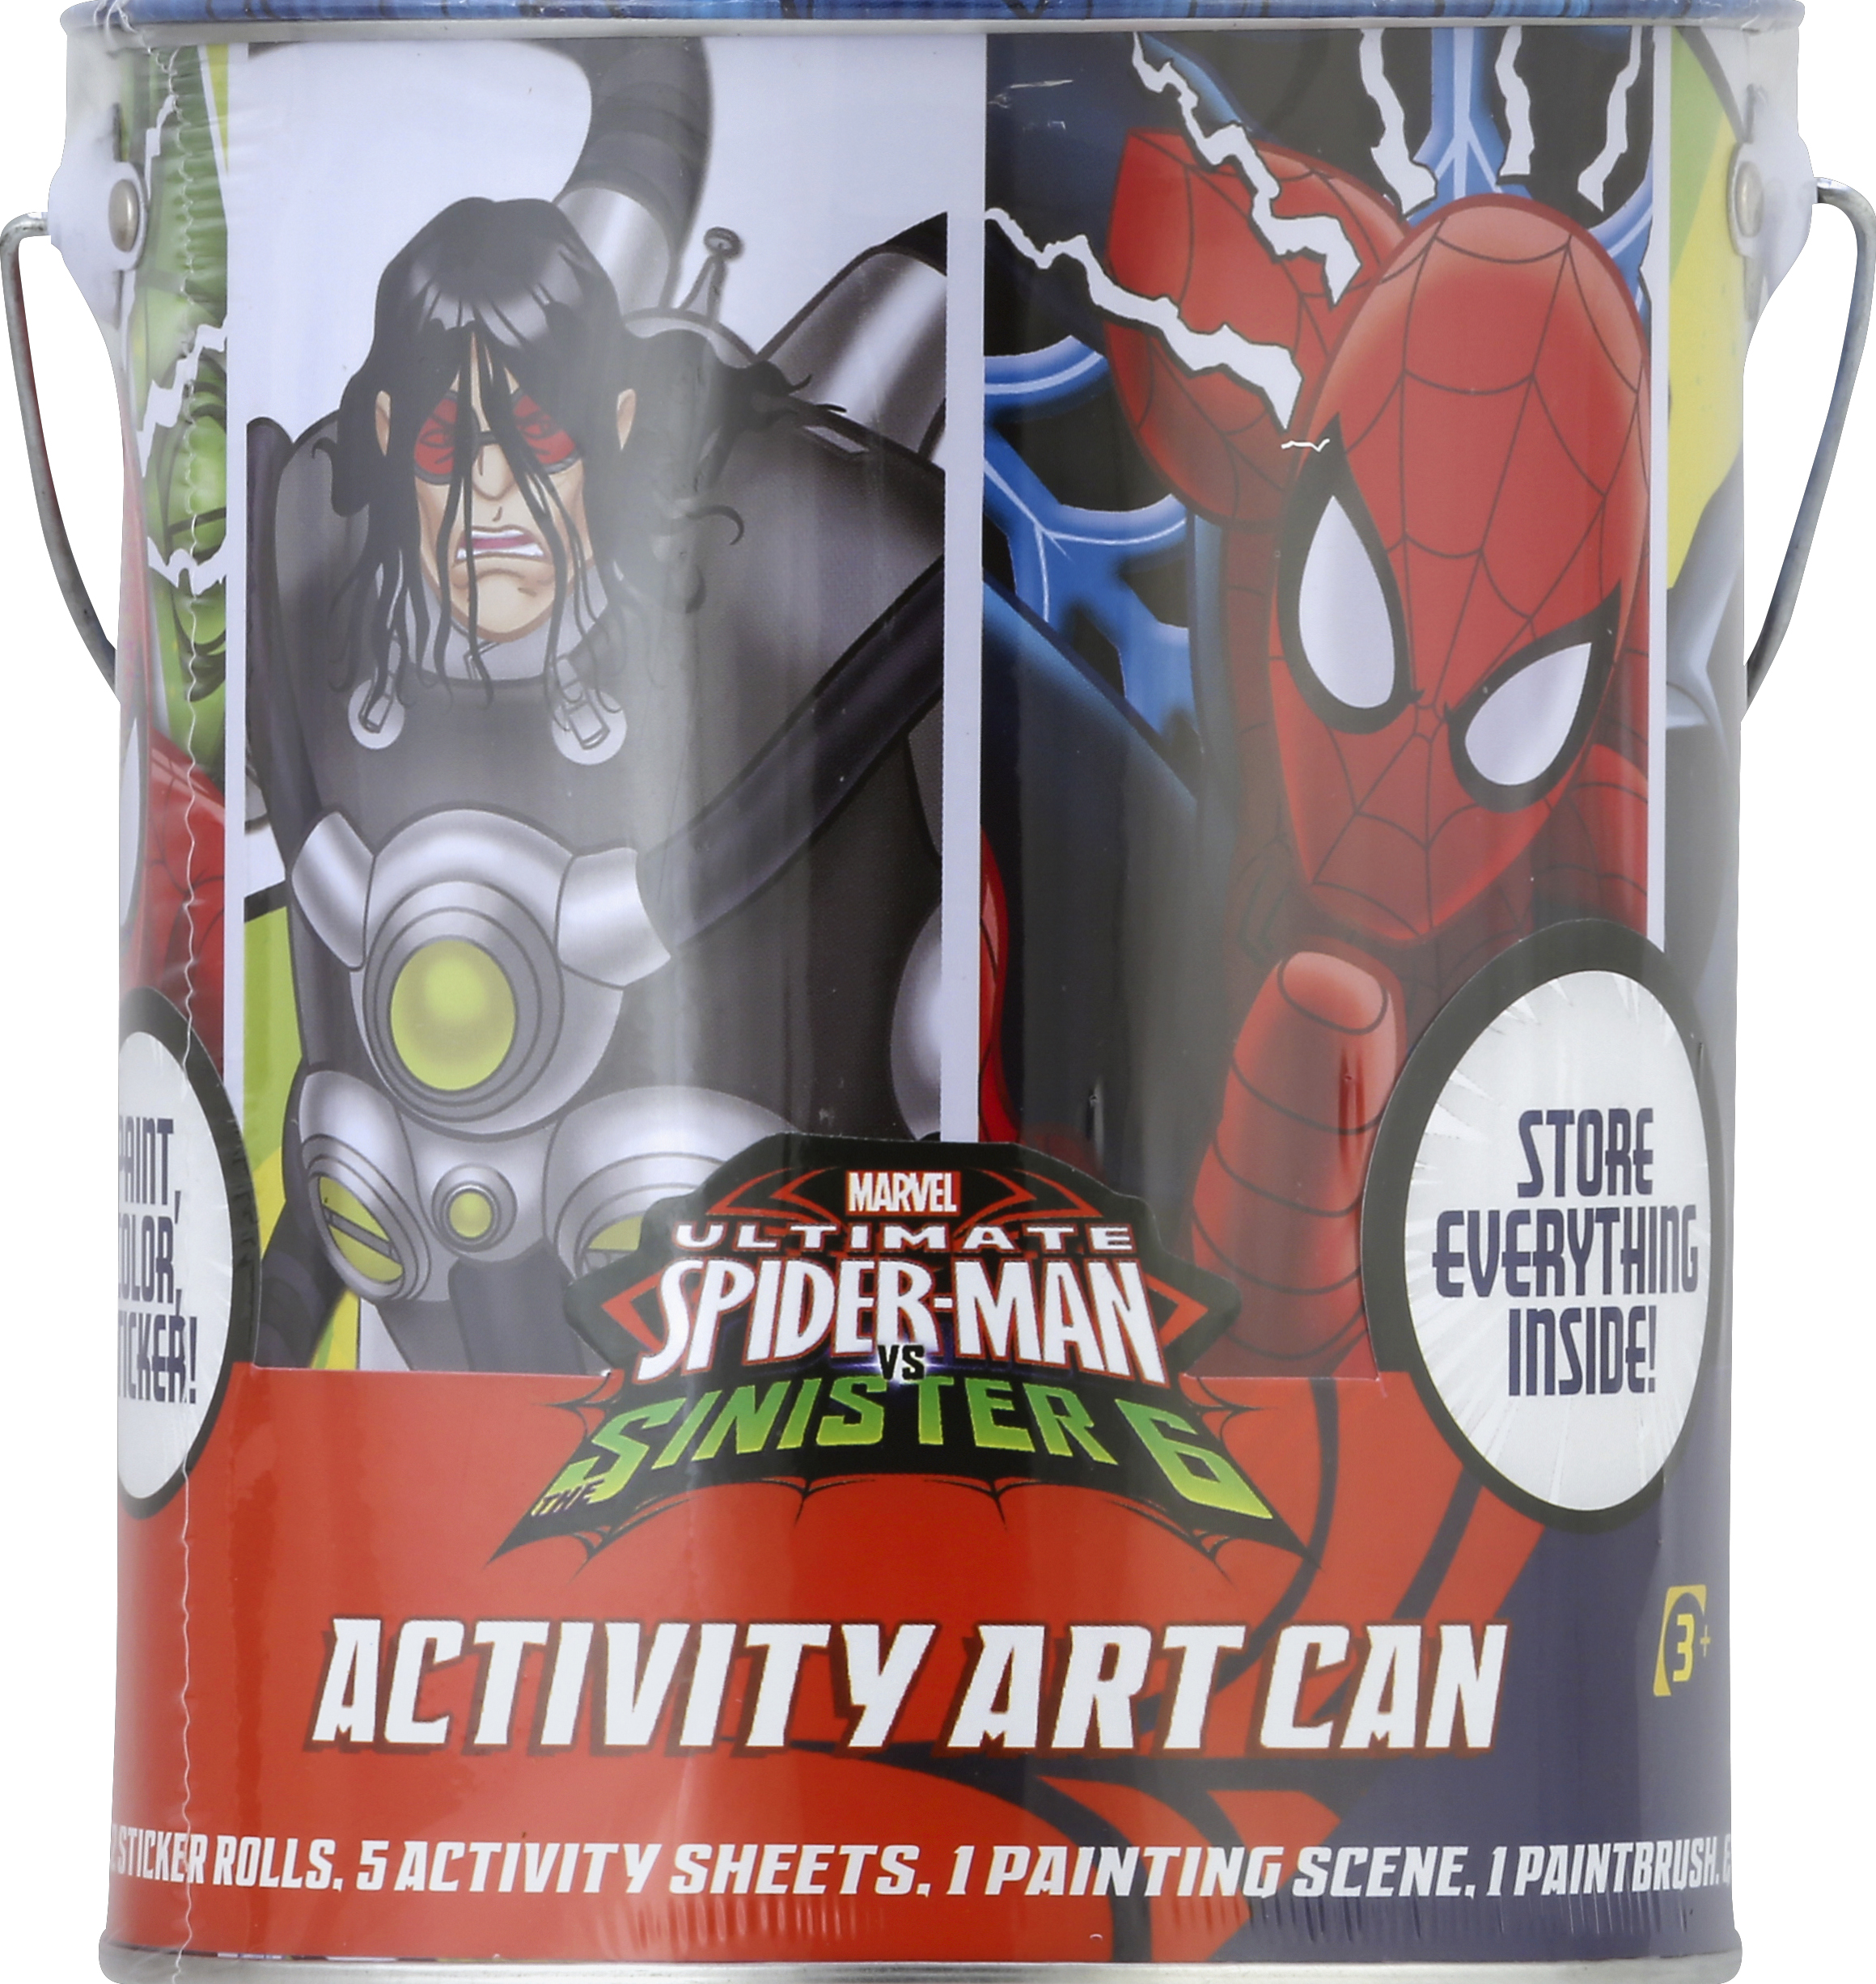 Spiderman Small Activity Art Can - image 2 of 2